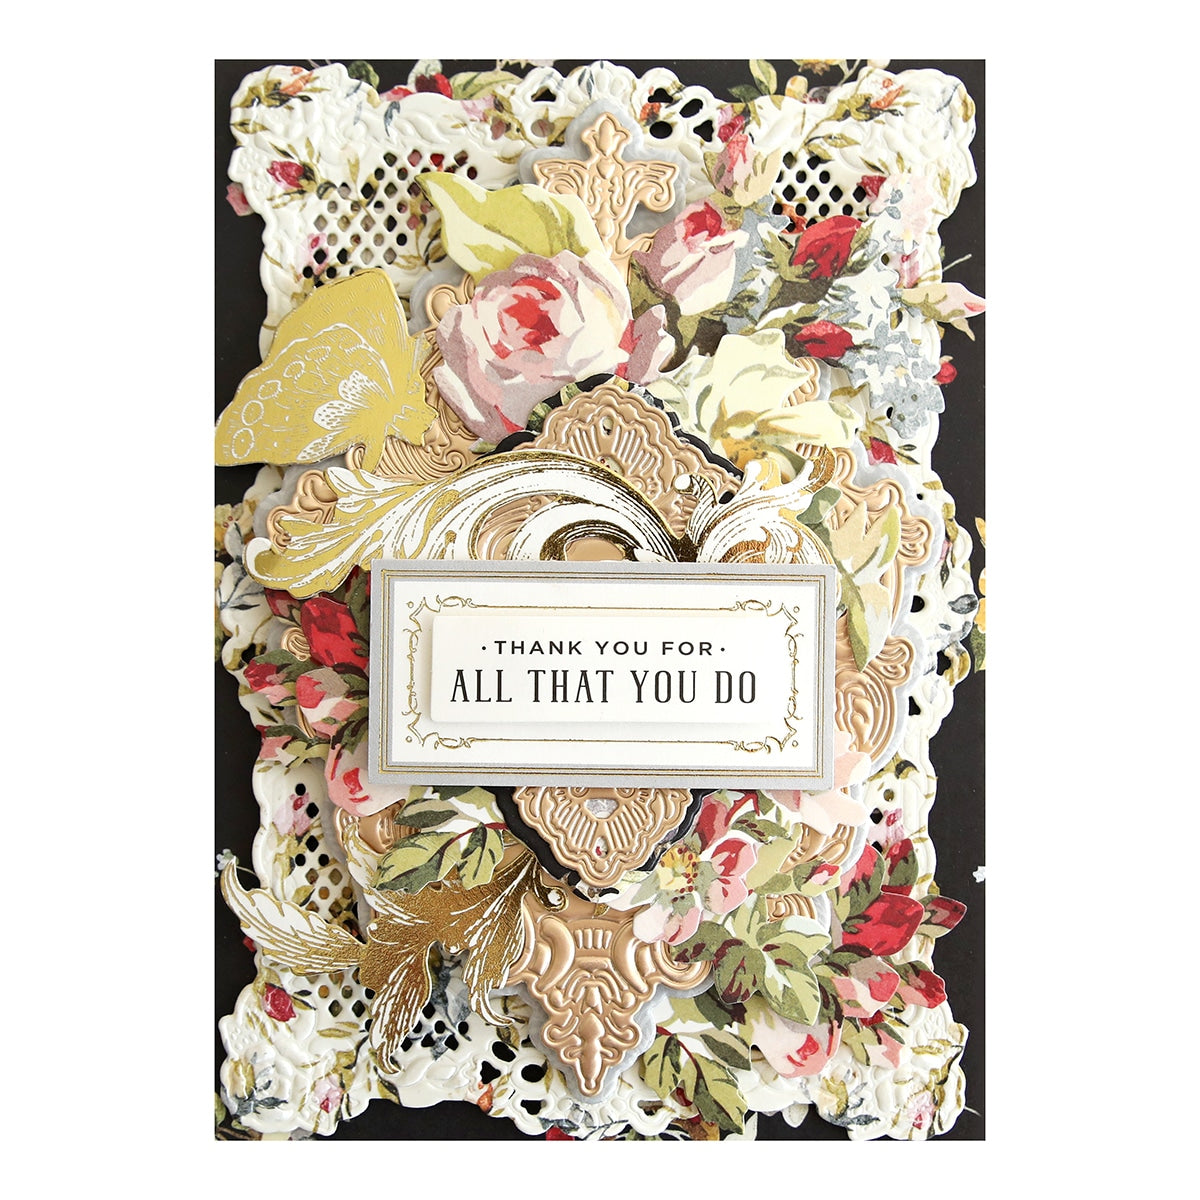 a card with a floral design and a thank you for all that you do written.